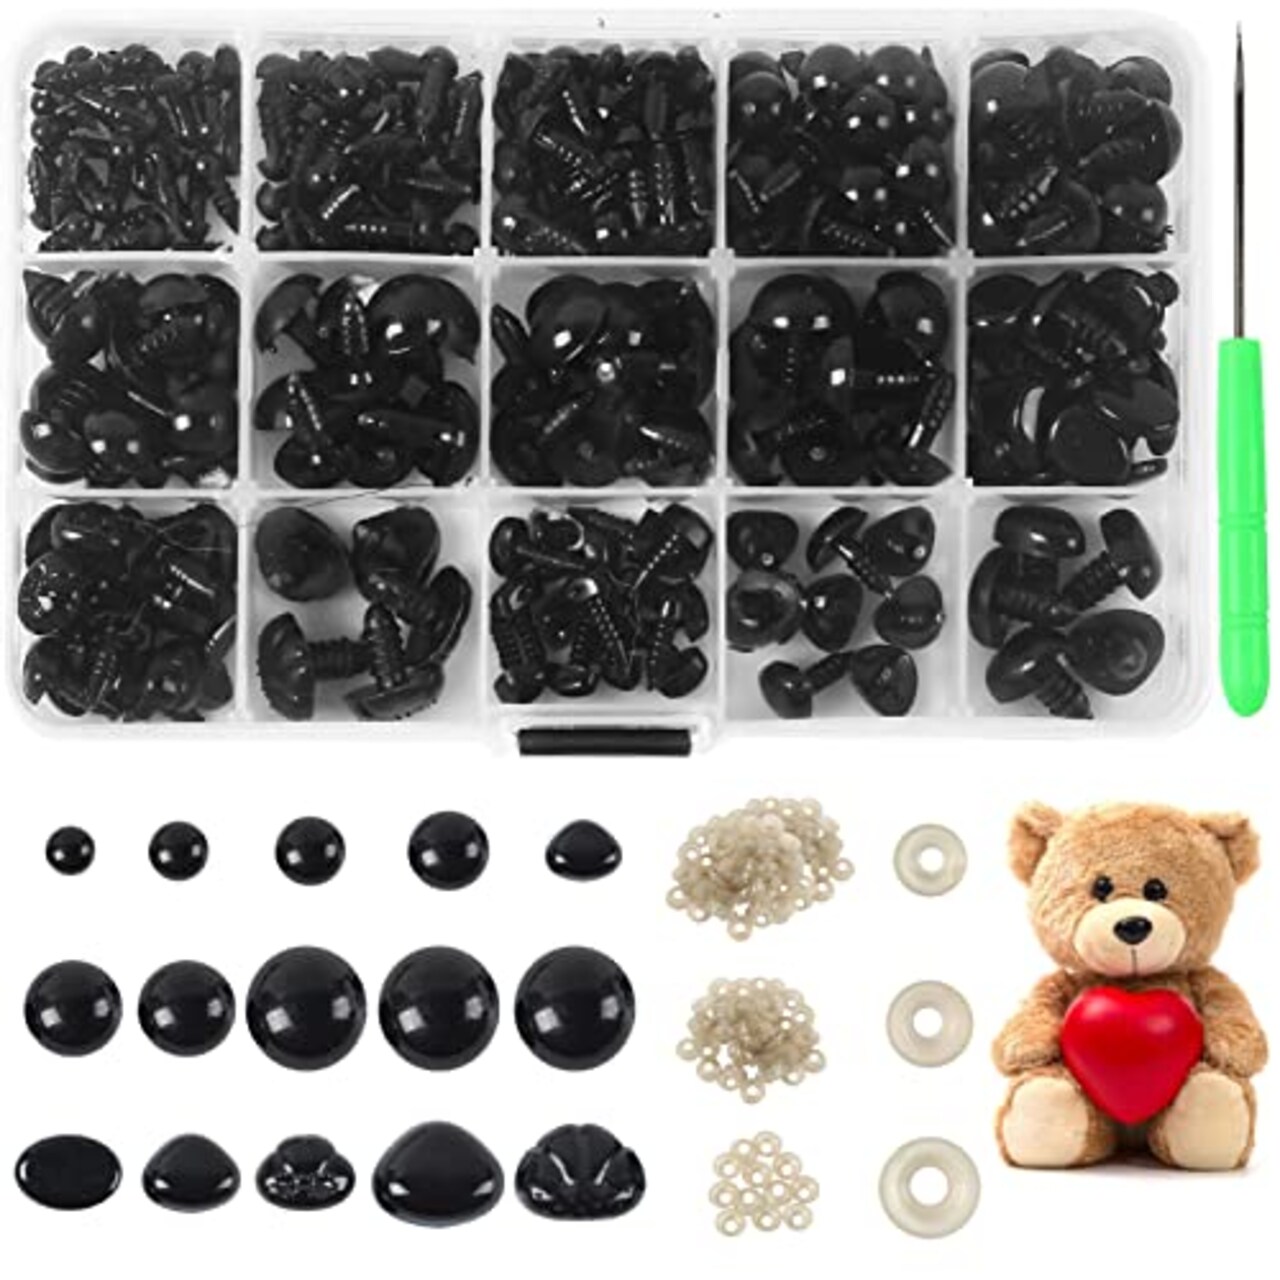 Yexixsr 566PCS Safety Eyes and Noses for Amigurumi, Stuffed Crochet Eyes  with Washers, Craft Doll Eyes and Nose for Teddy Bear, Crochet Toy, Stuffed  Doll and Plush Animal (Various Sizes)